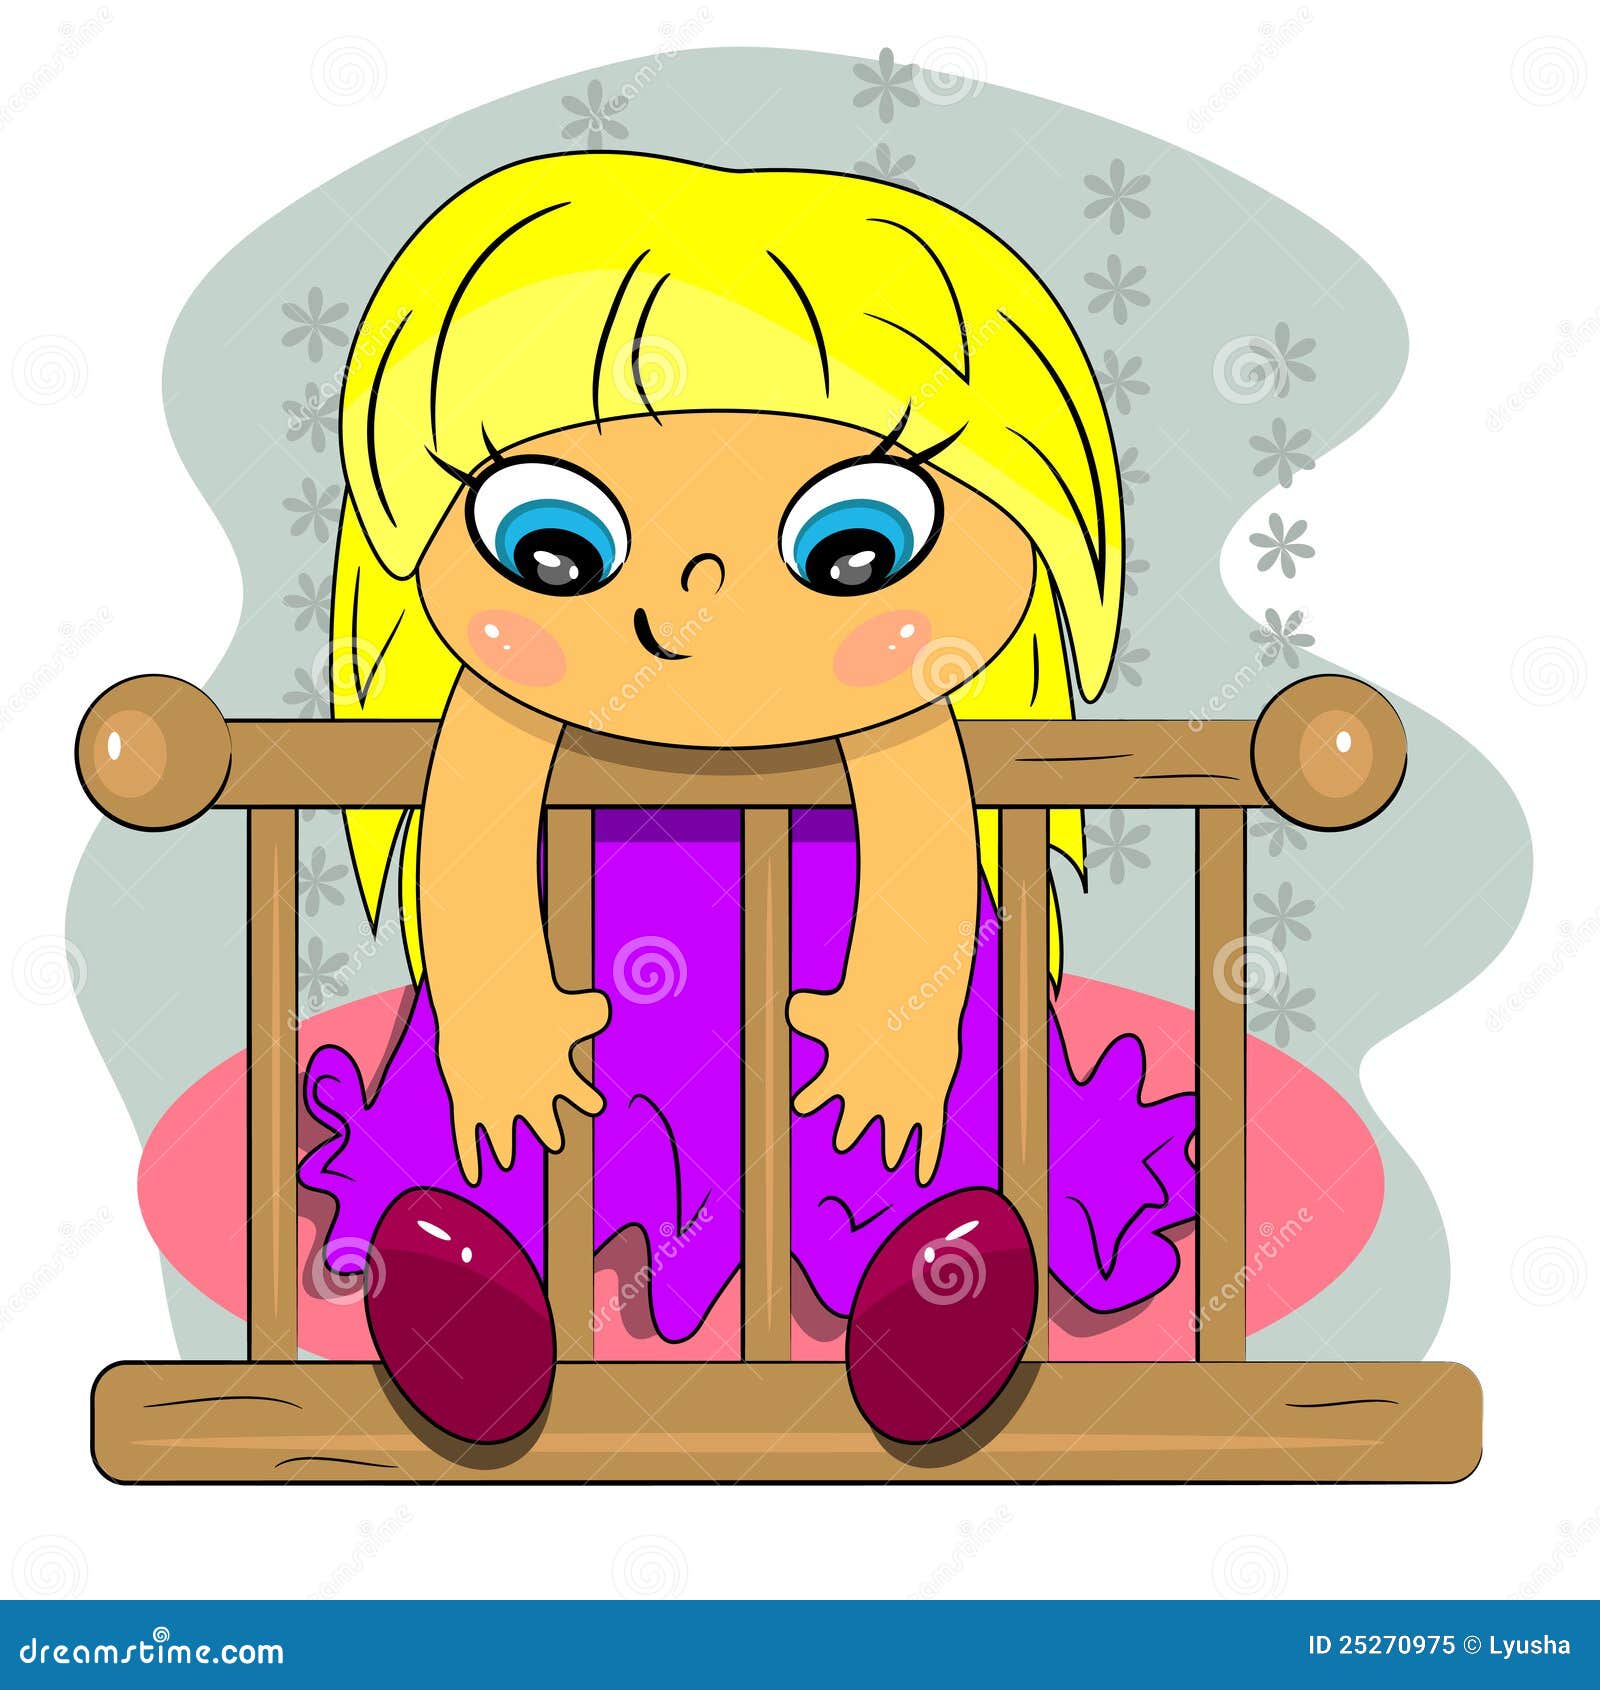 Cartoon Girl Sitting In Bed Icon Royalty Free Stock Photo - Image ...